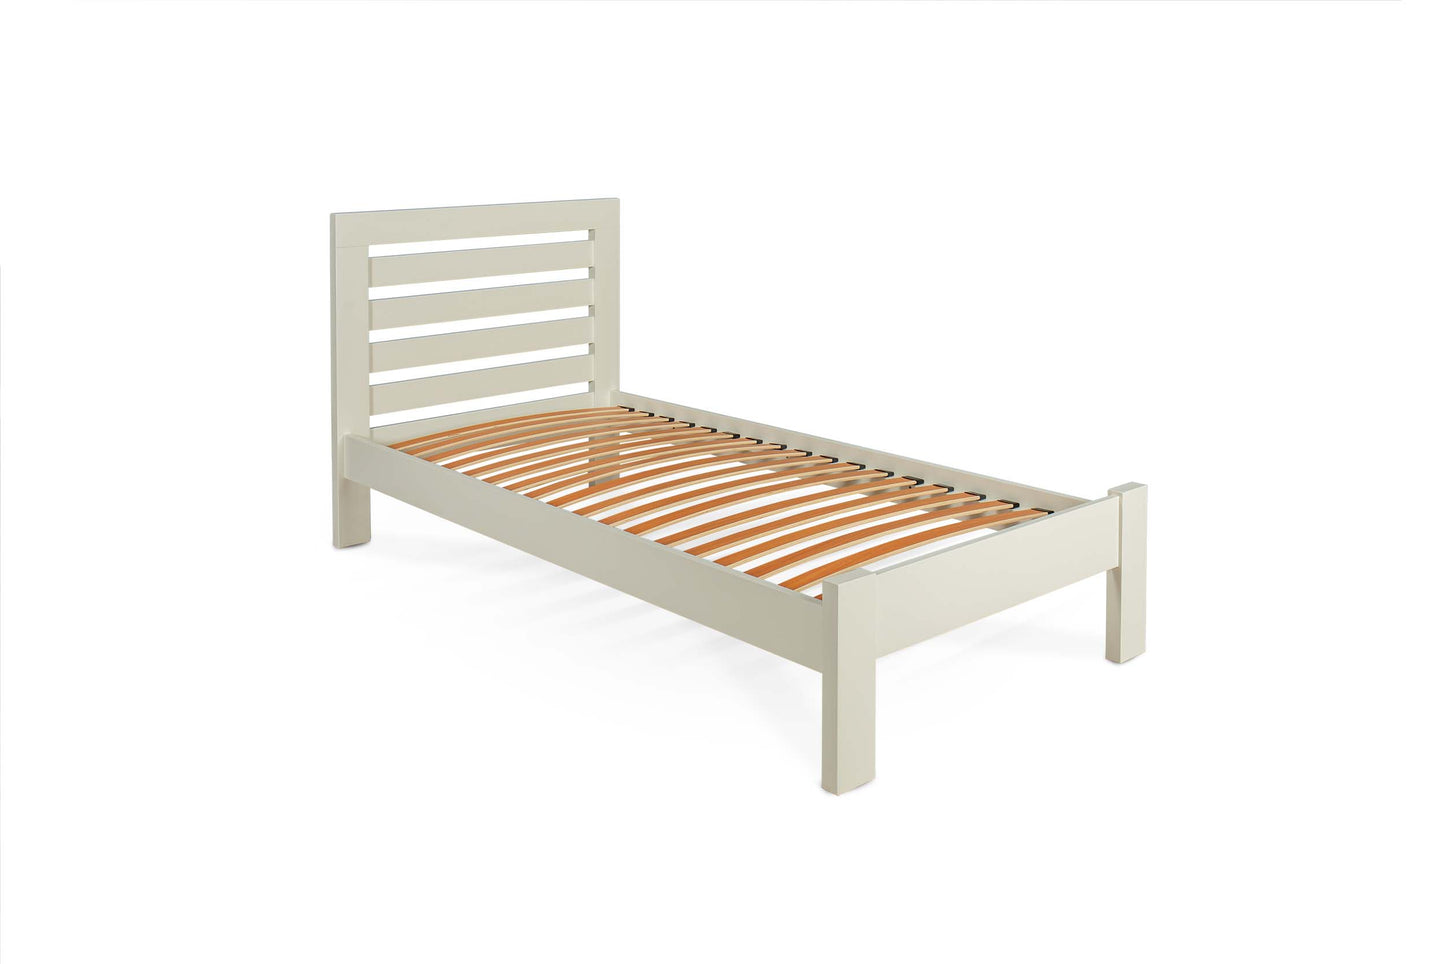 Wingfield Bed Frame - 3ft Single - Soft White